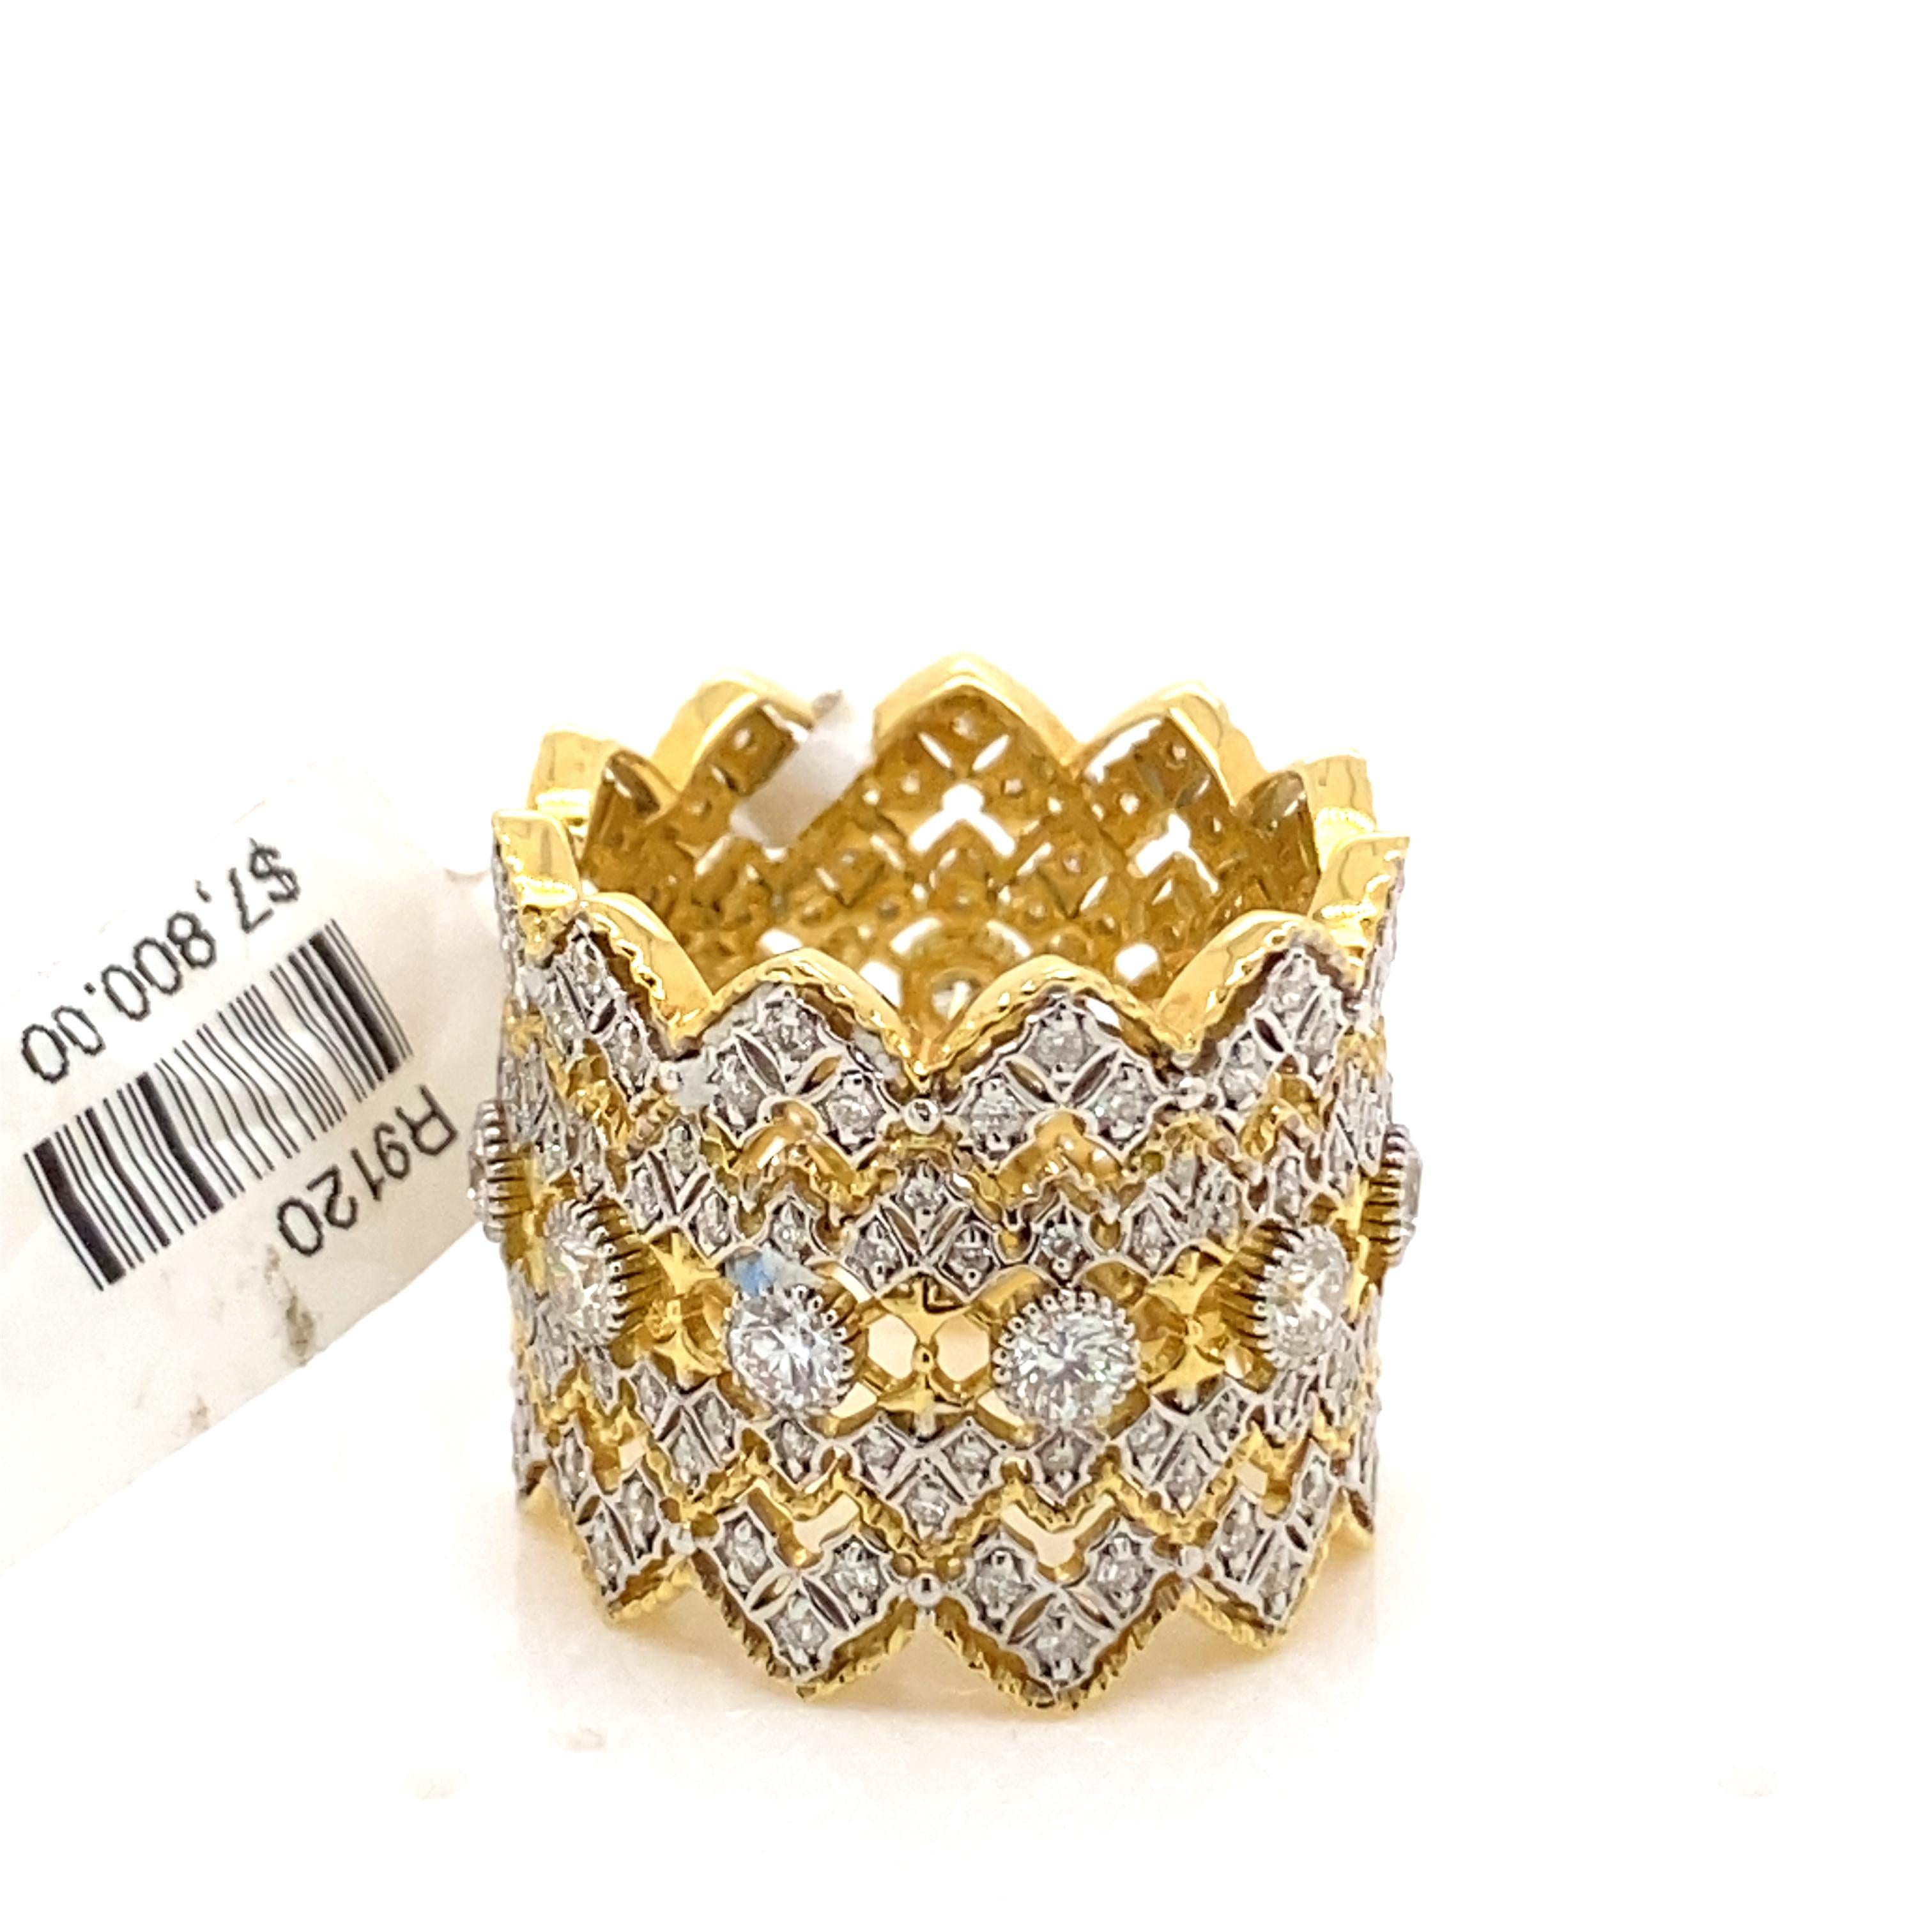 Beautiful Victorian style hand made two-tone gold with diamonds ring.
165 round diamonds 1.38ct, approximately G/H color and SI clarity. 18-karat yellow and white gold with beautiful milgrain work. Size 6.
Accommodated with an up to date appraisal